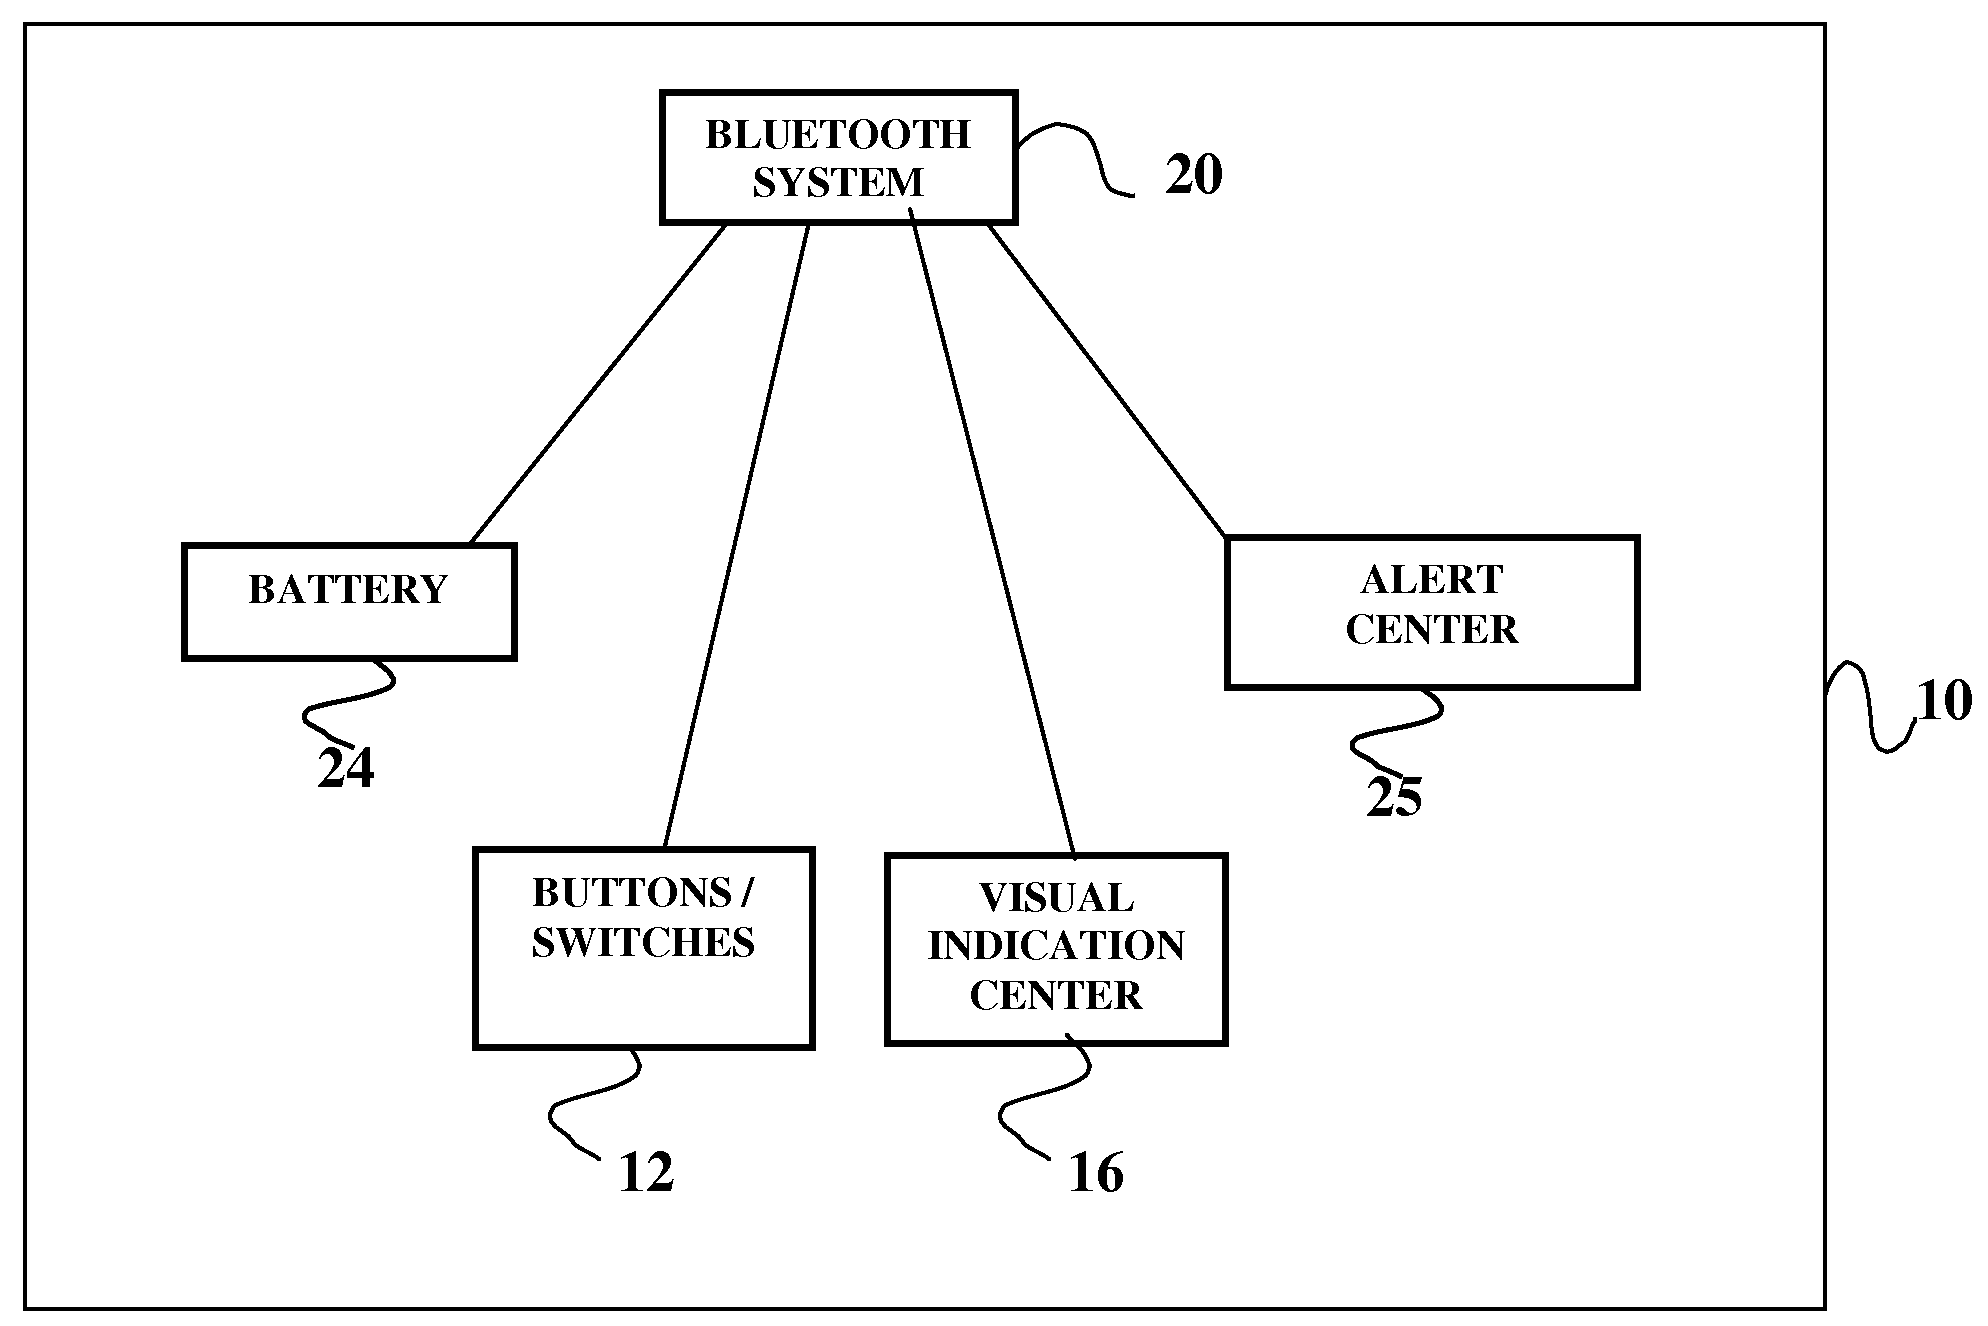 Systems for wireless authentication based on bluetooth proximity